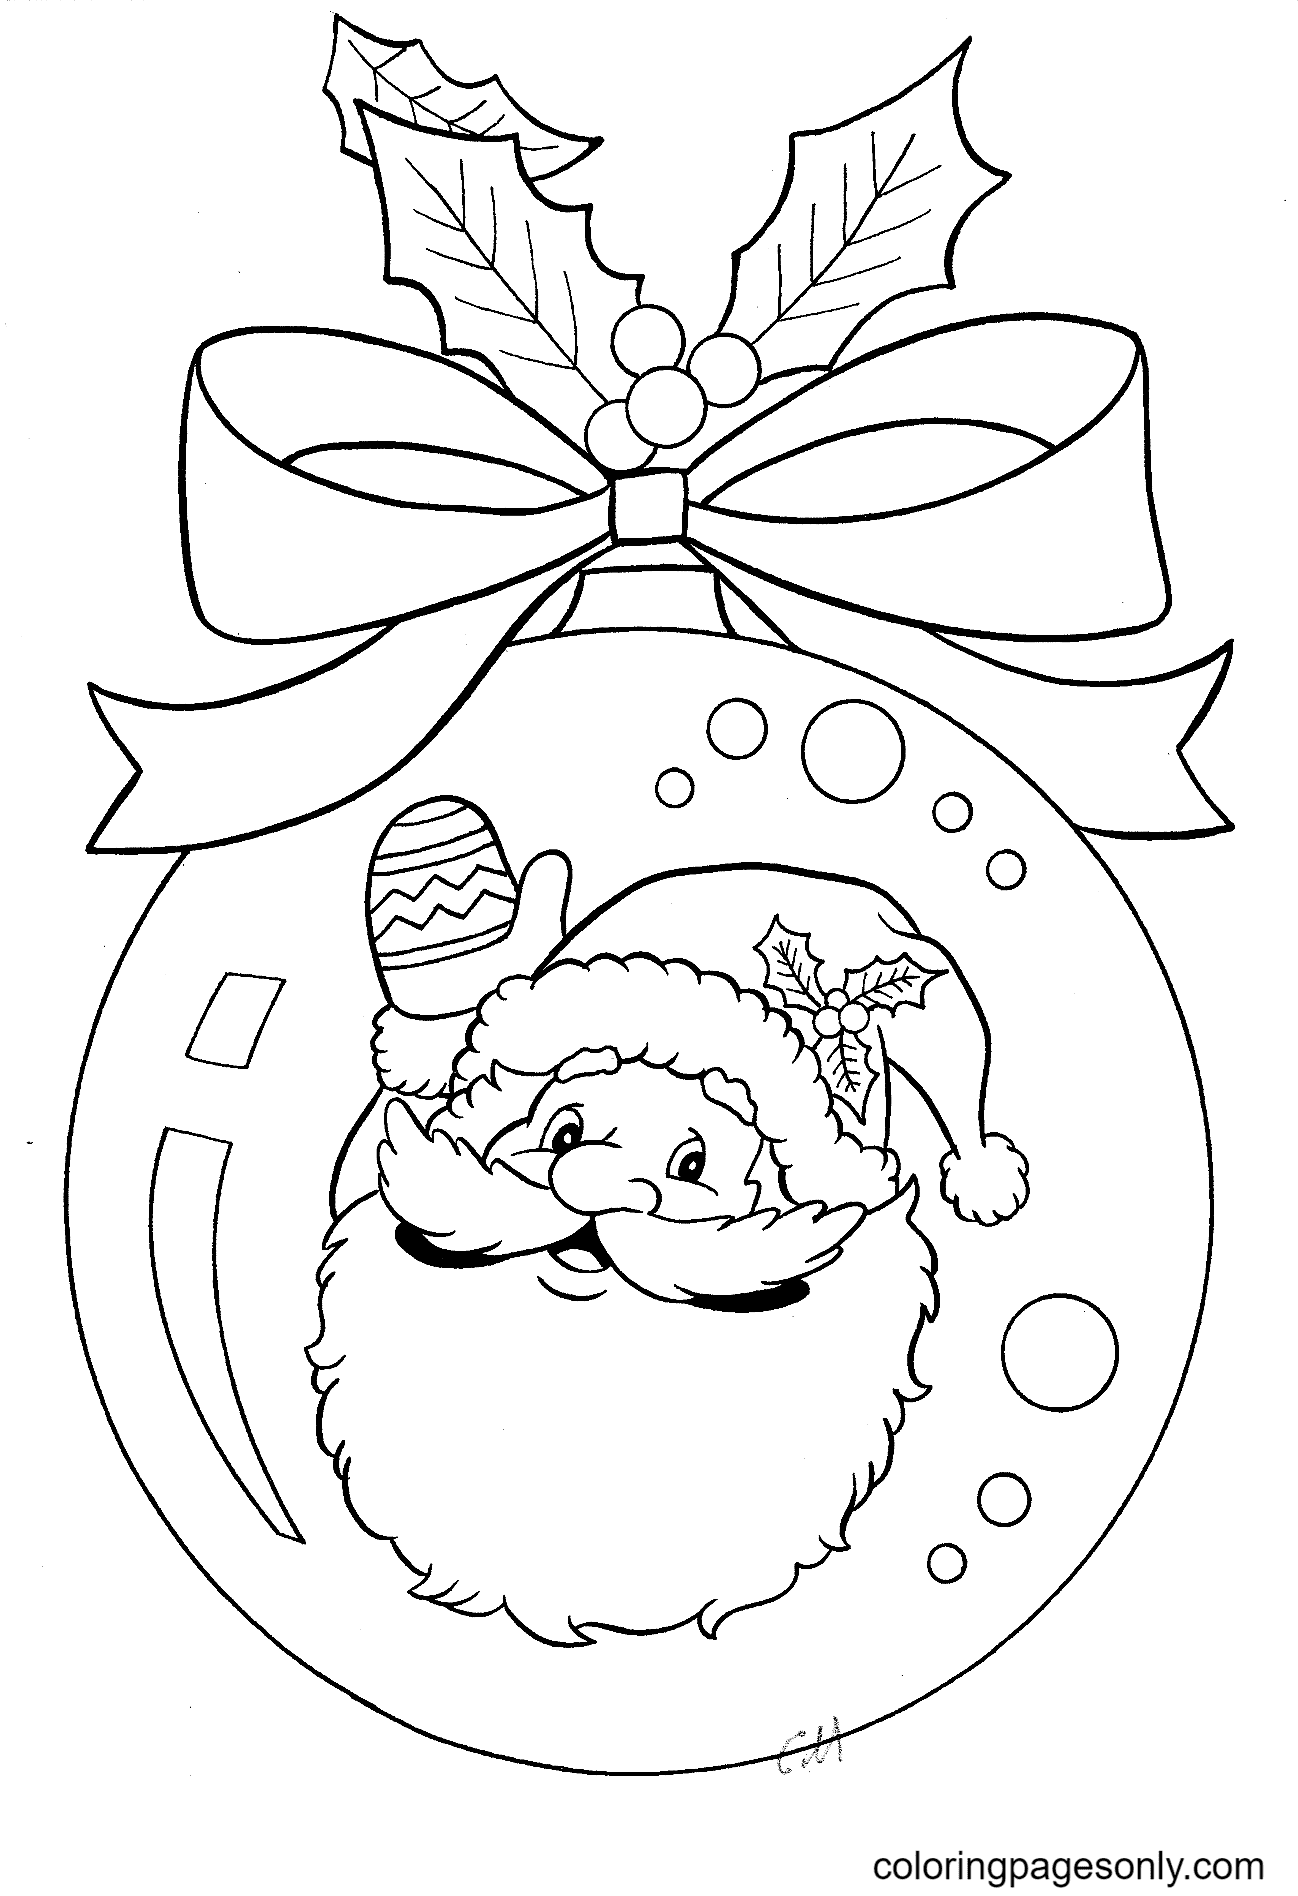 Christmas Decorations Ball Coloring Page